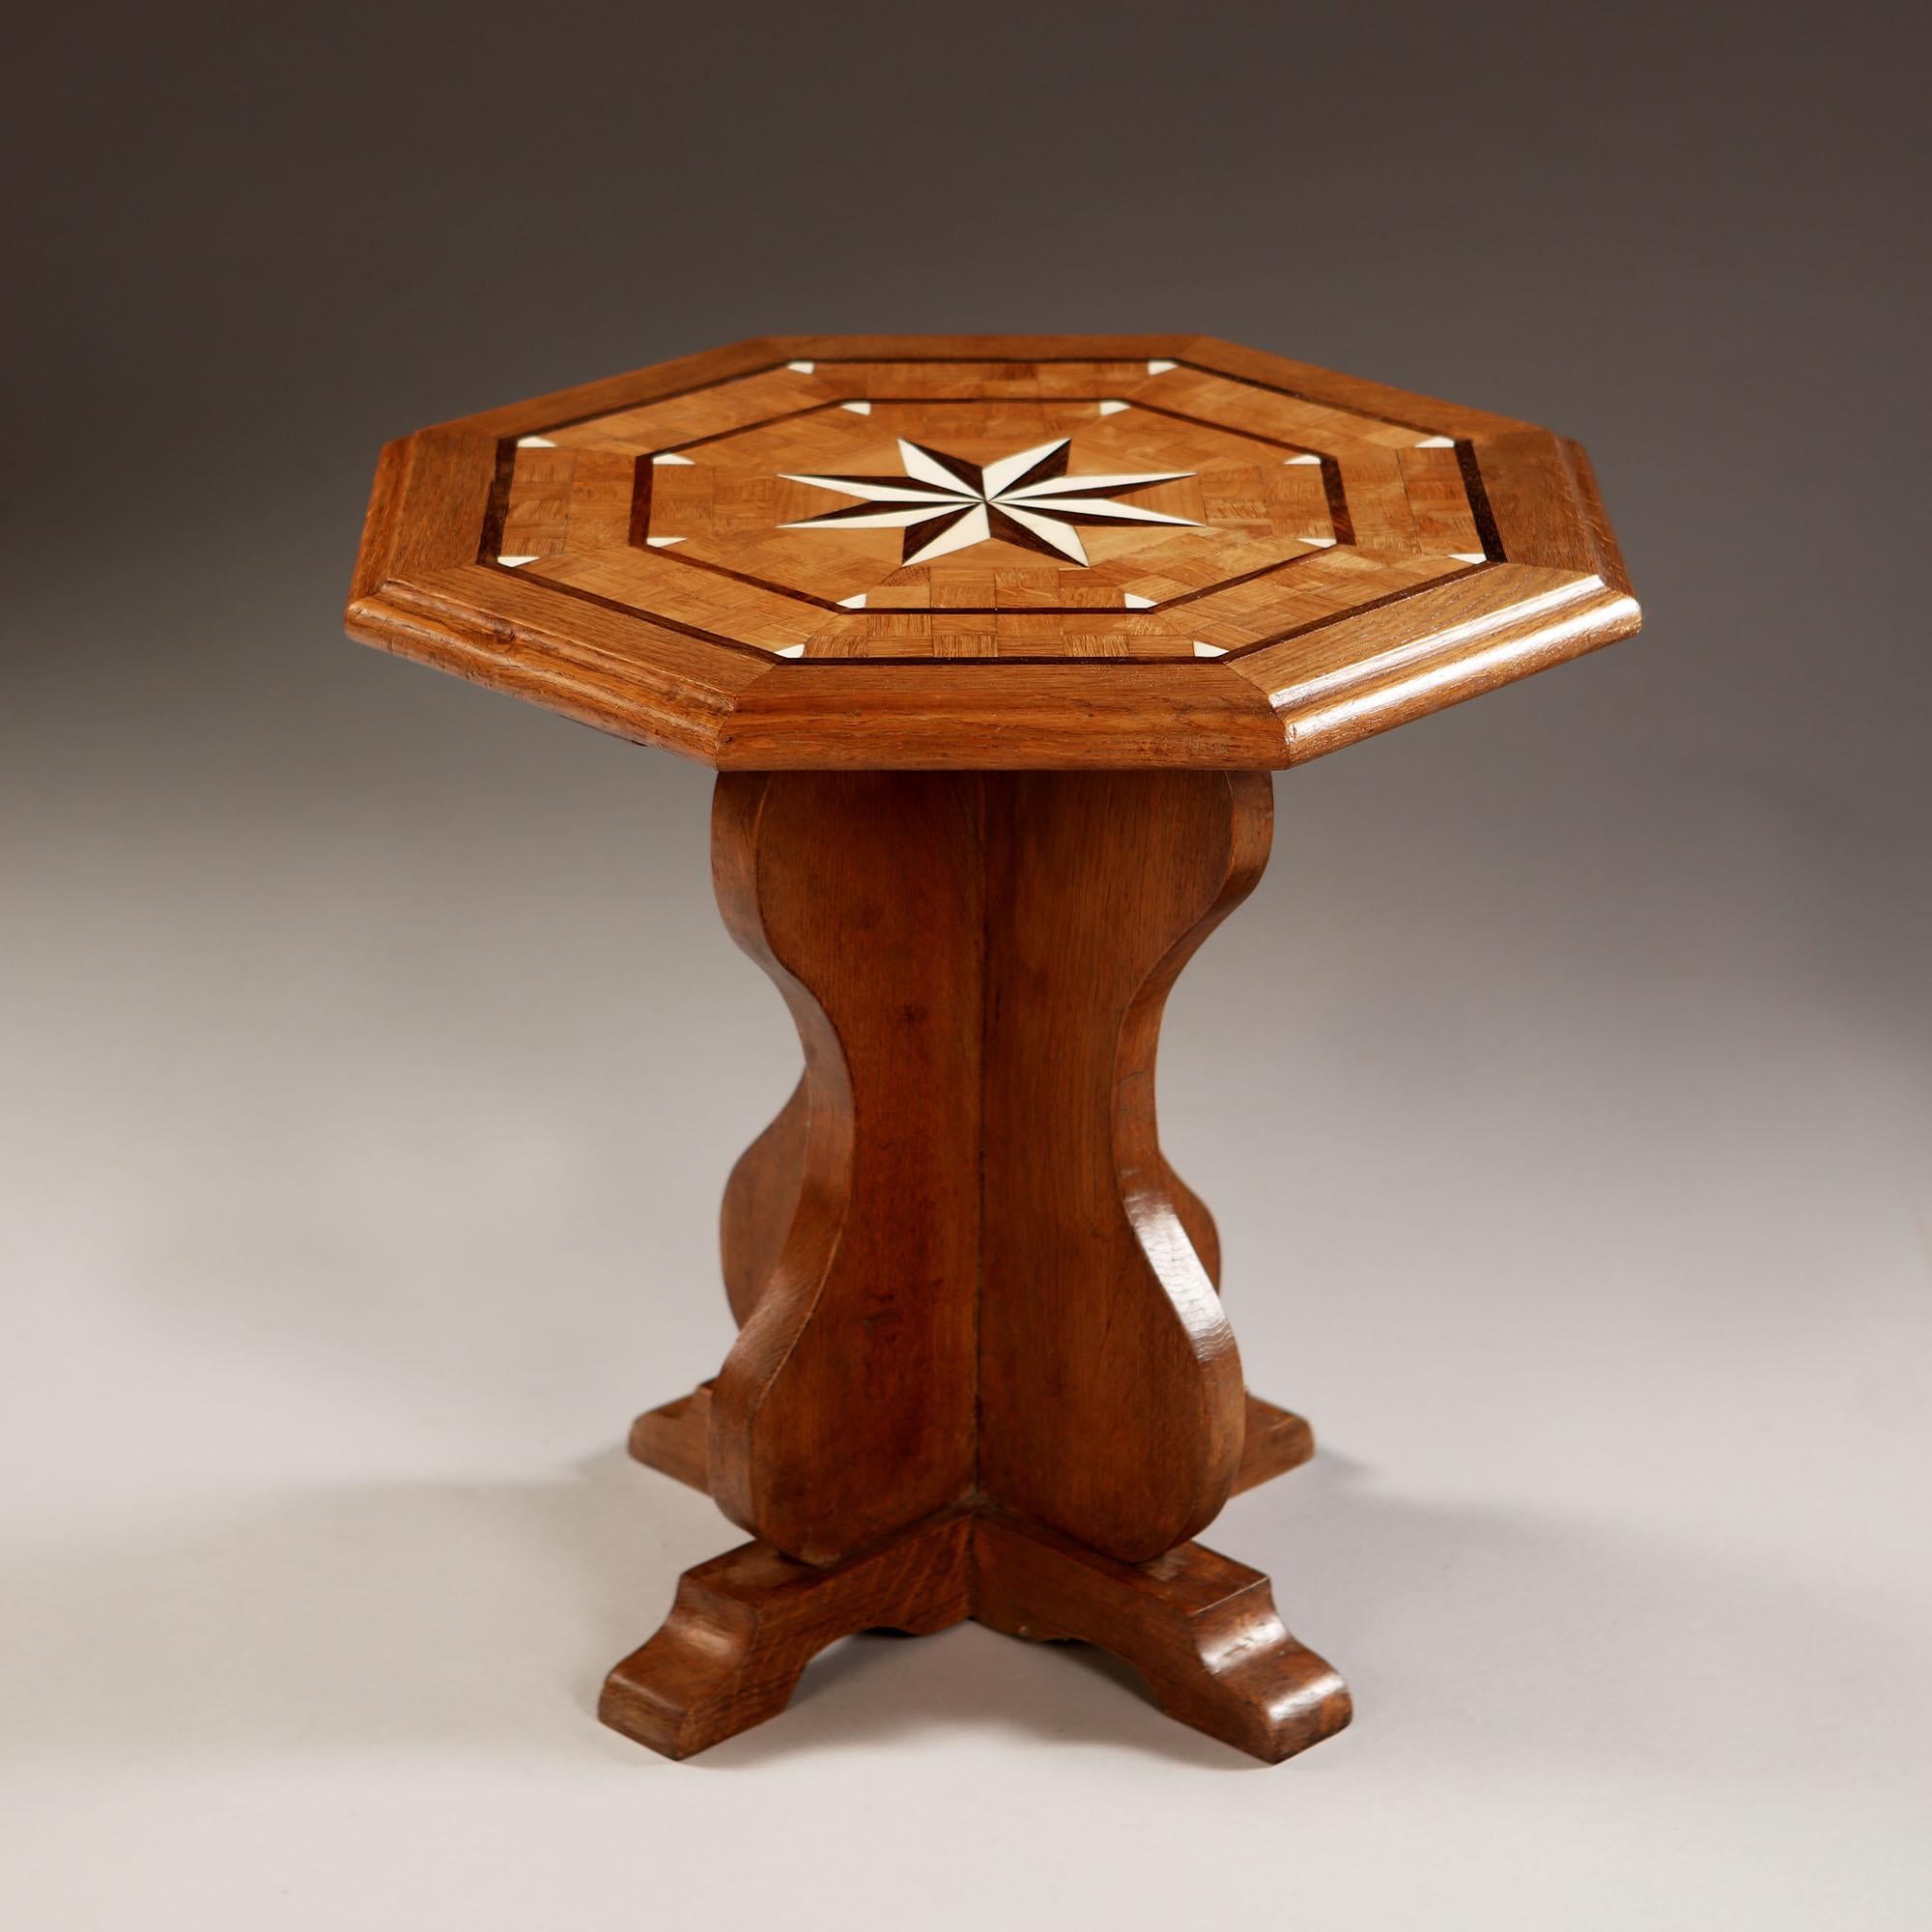 An early 20th century English hexagonal oak occasional table with bone and palm wood inlay, with geometric star design to the top.